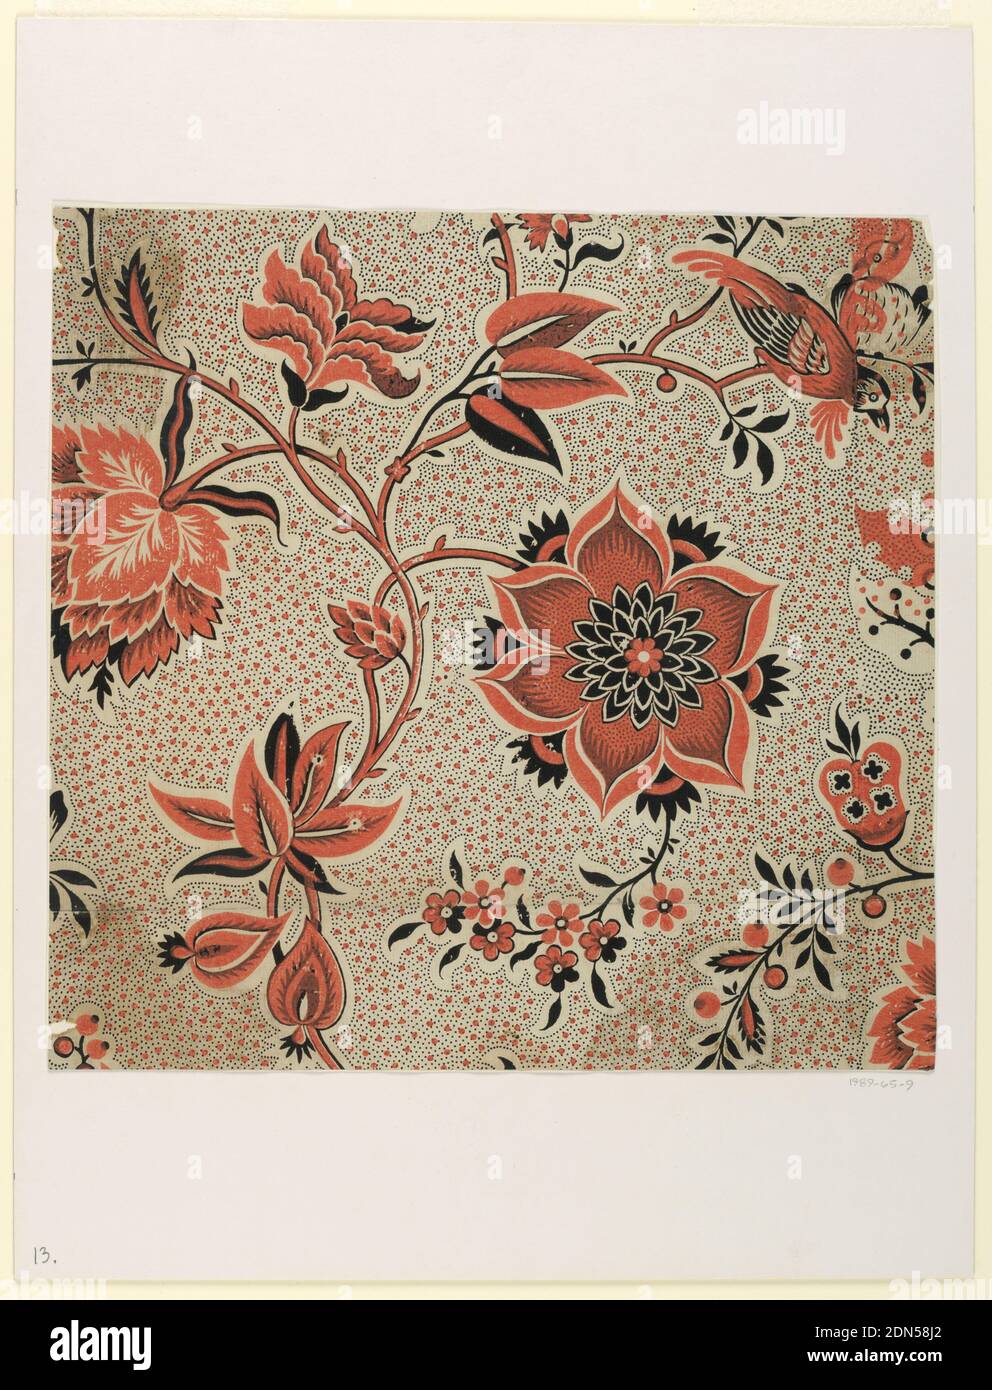 Design for Printed Textile, Block print on laid paper, Allover pattern of orange dots and small black dots. Stylized orange and black blossoms, with intertwined vines and a bird in upper right., France, 18th century, textile designs, Print Stock Photo